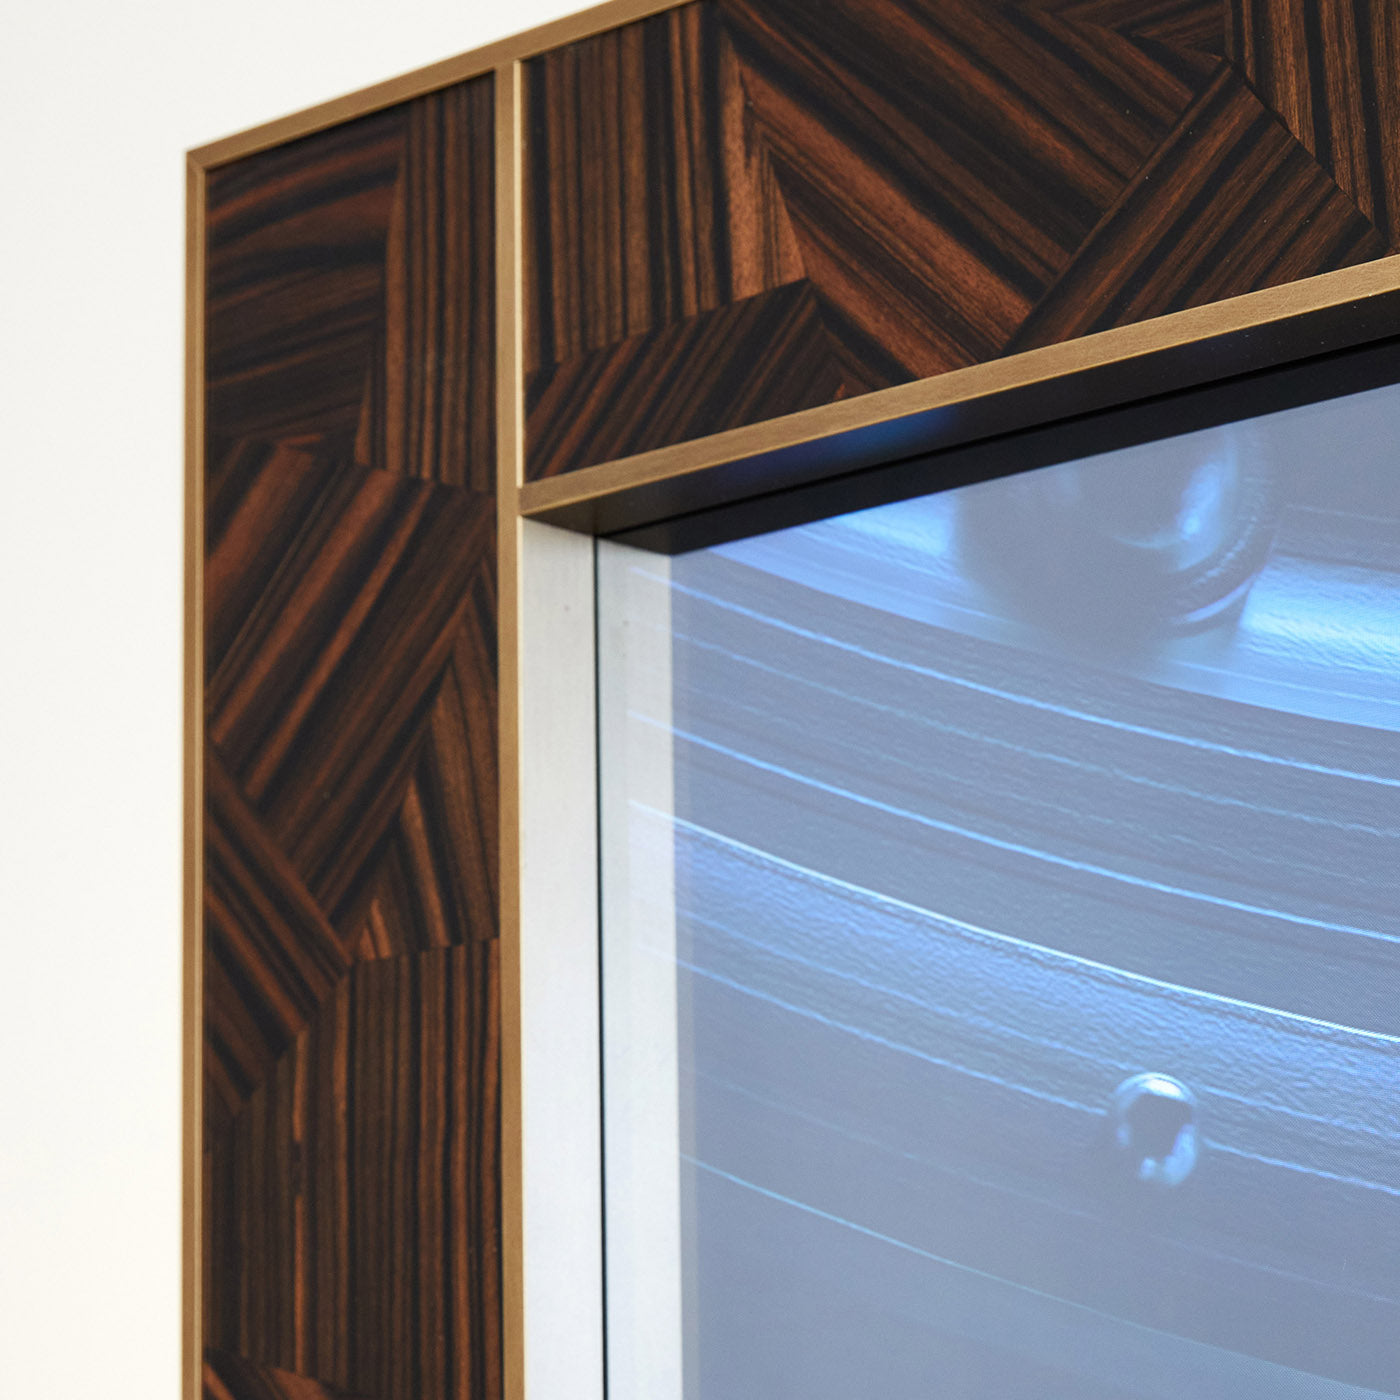 Inda Wall Mirror with Integrated 43" TV by Alfredo Colombo - Alternative view 1